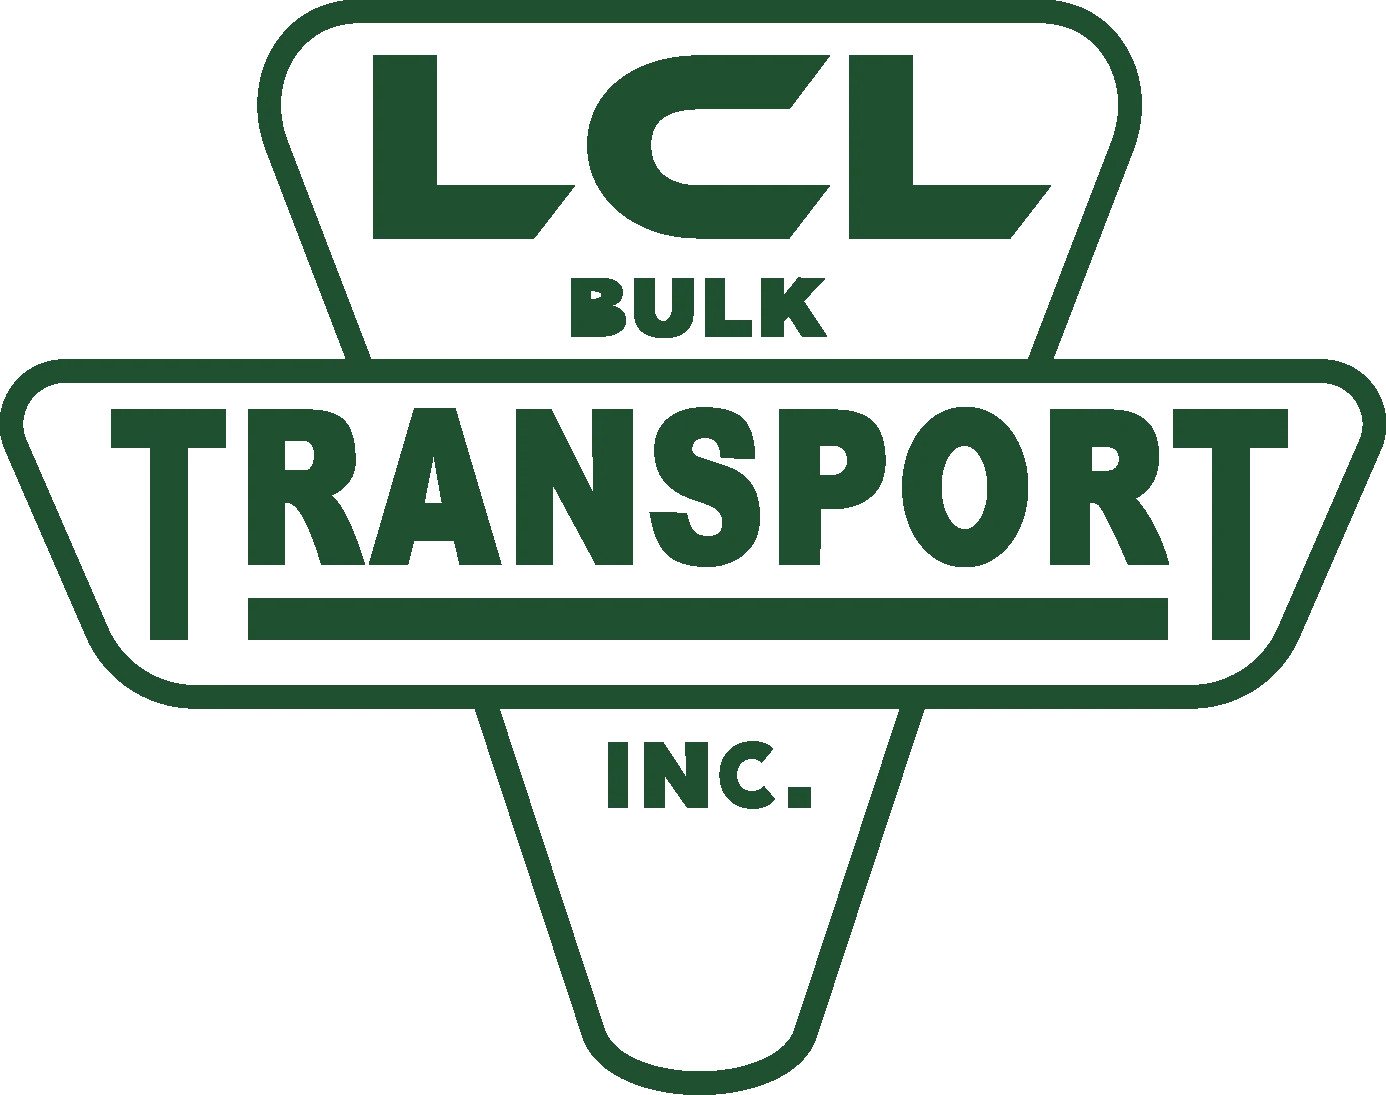 A green and white logo for "LCL Bulk Transport Inc." featuring bold, stylized text. The words "LCL" are at the top, "BULK" in the middle, and "TRANSPORT INC." across a broad, horizontal section at the bottom, all within a triangular frame.